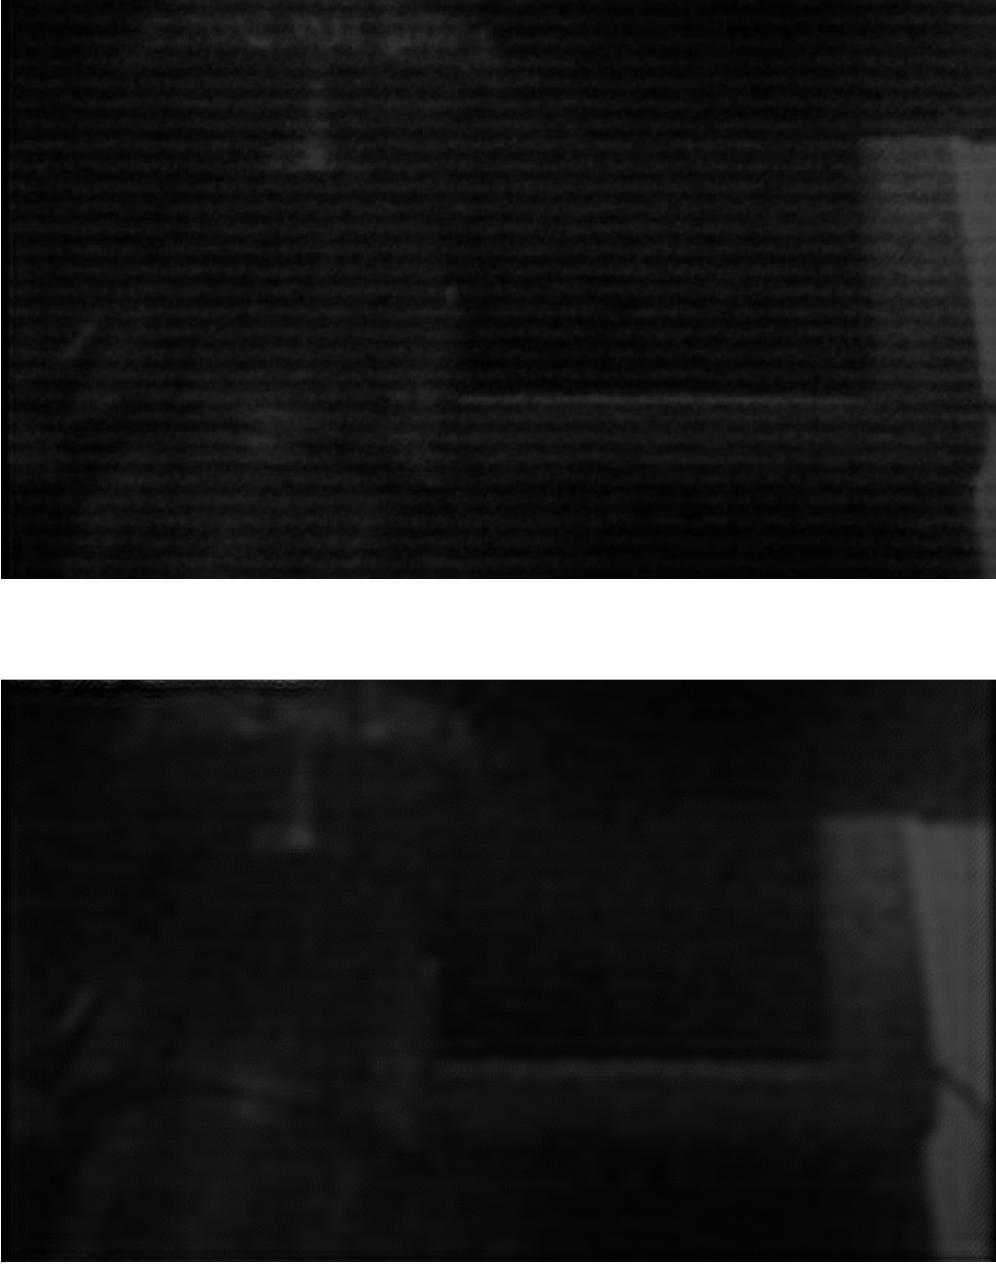 Testing: The real time video signal we obtained from the CMOS Image sensor has a periodic noise along the X- axis.